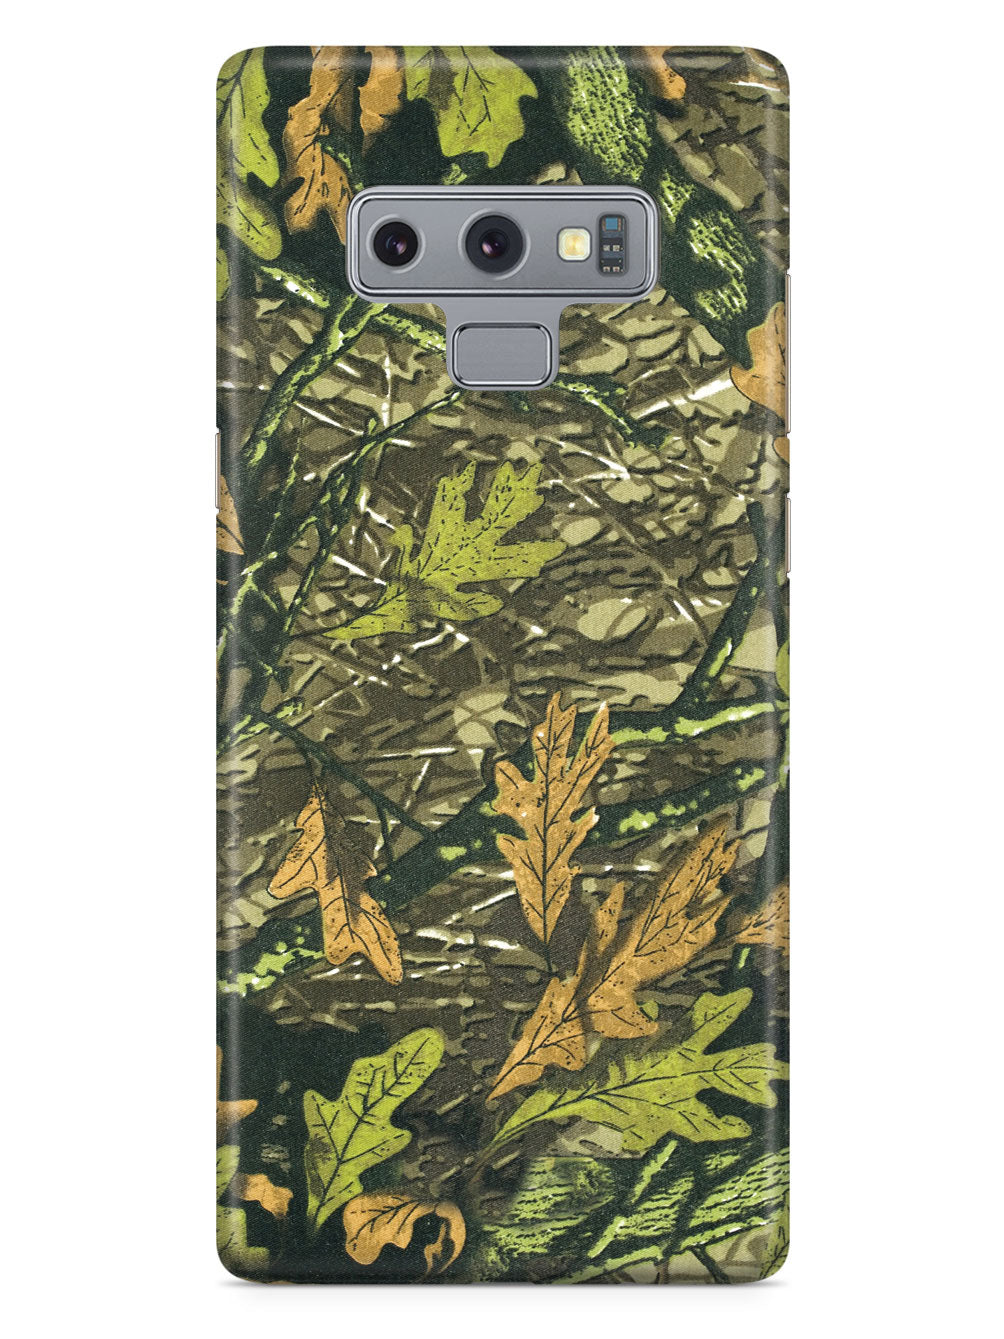 Green Hunter Camouflage Case